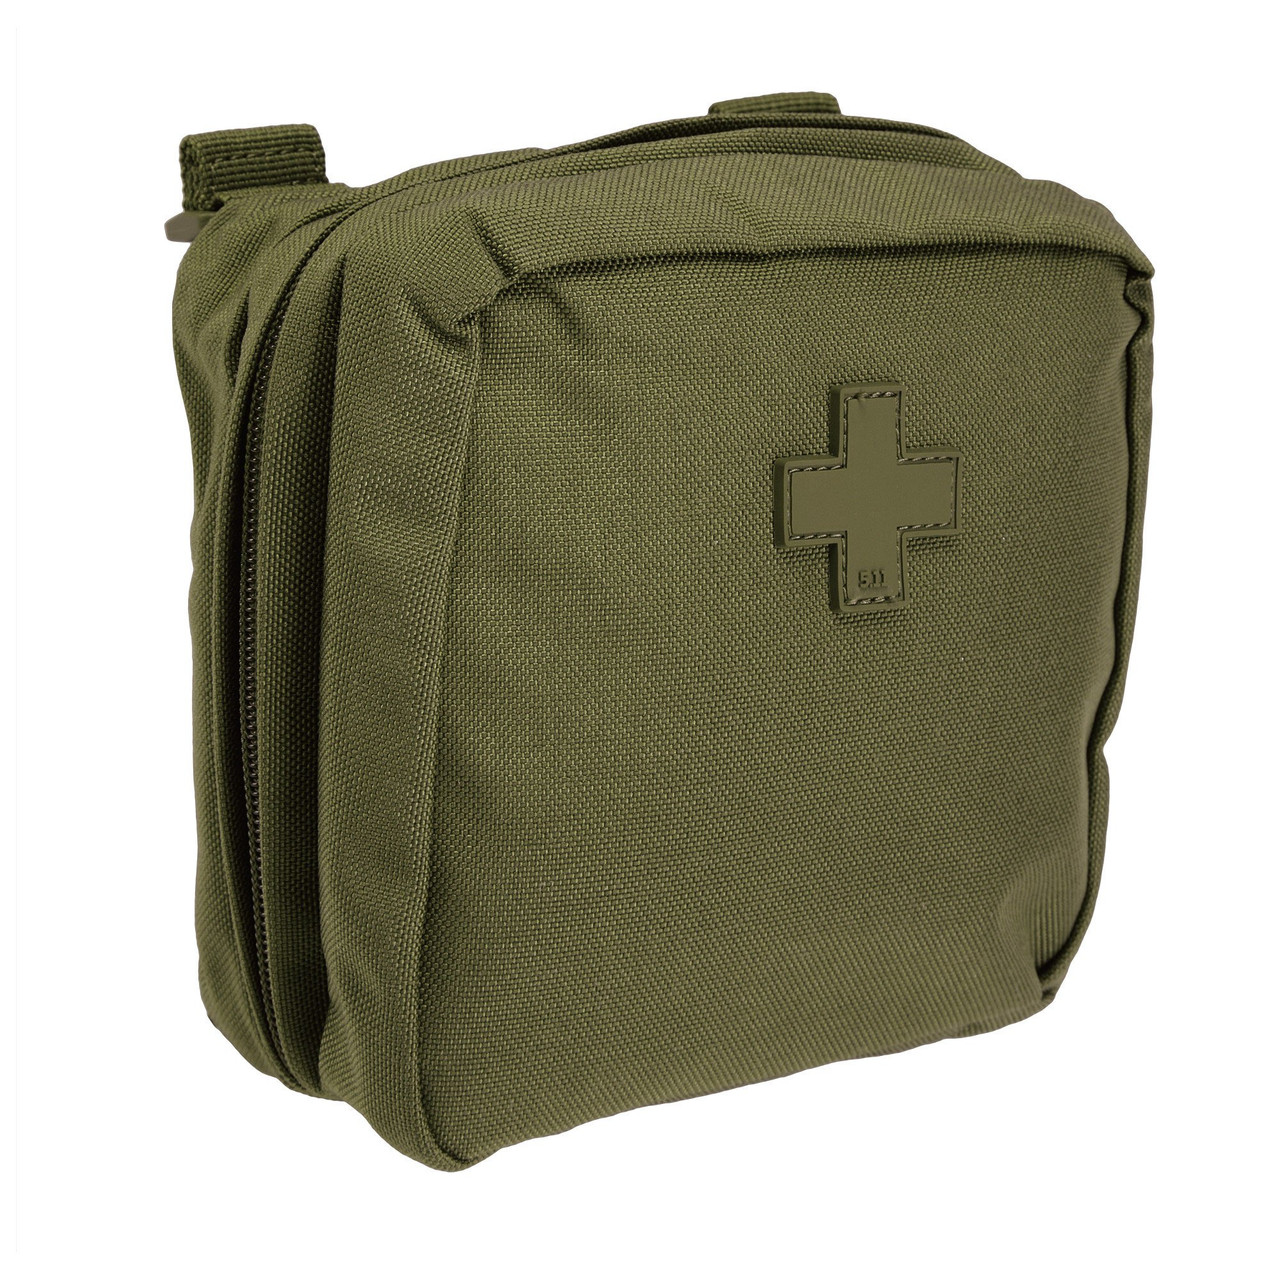 Style 56096 5.11 Tactical 3 X 6 Medical Kit MOLLE Pouch Padded Gear Bag 